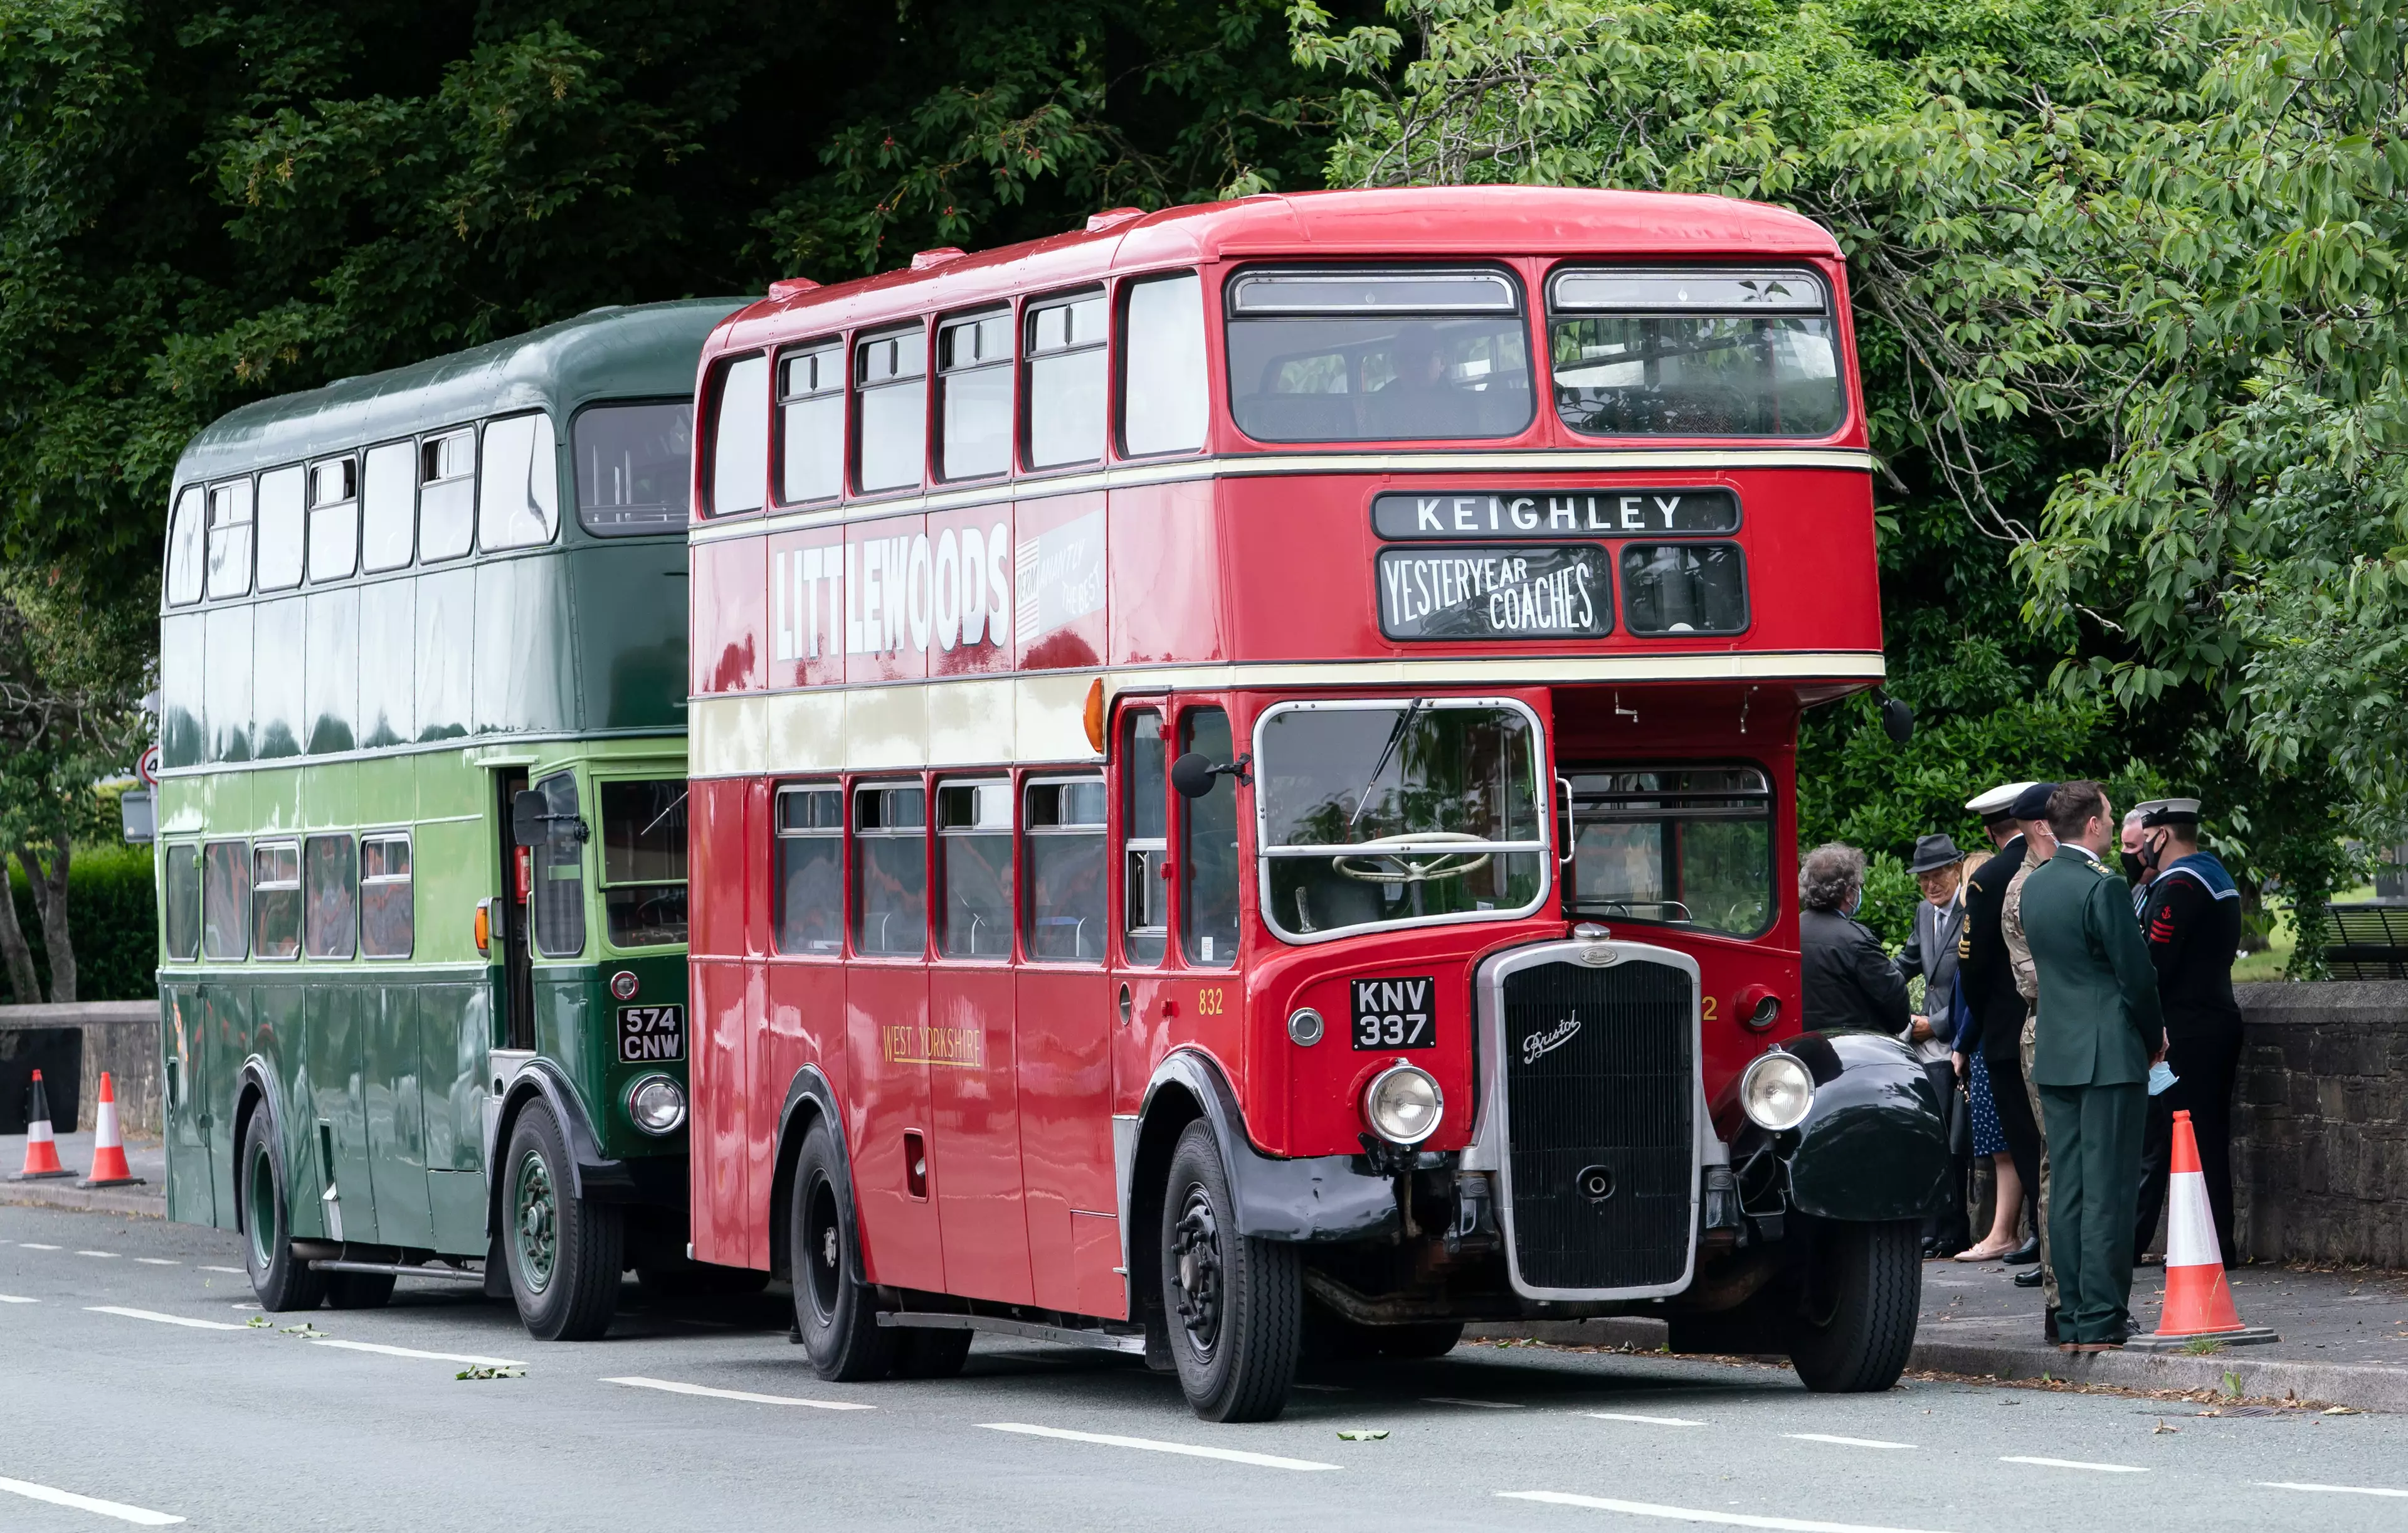 The guard of honour arrived on two vintage buses.